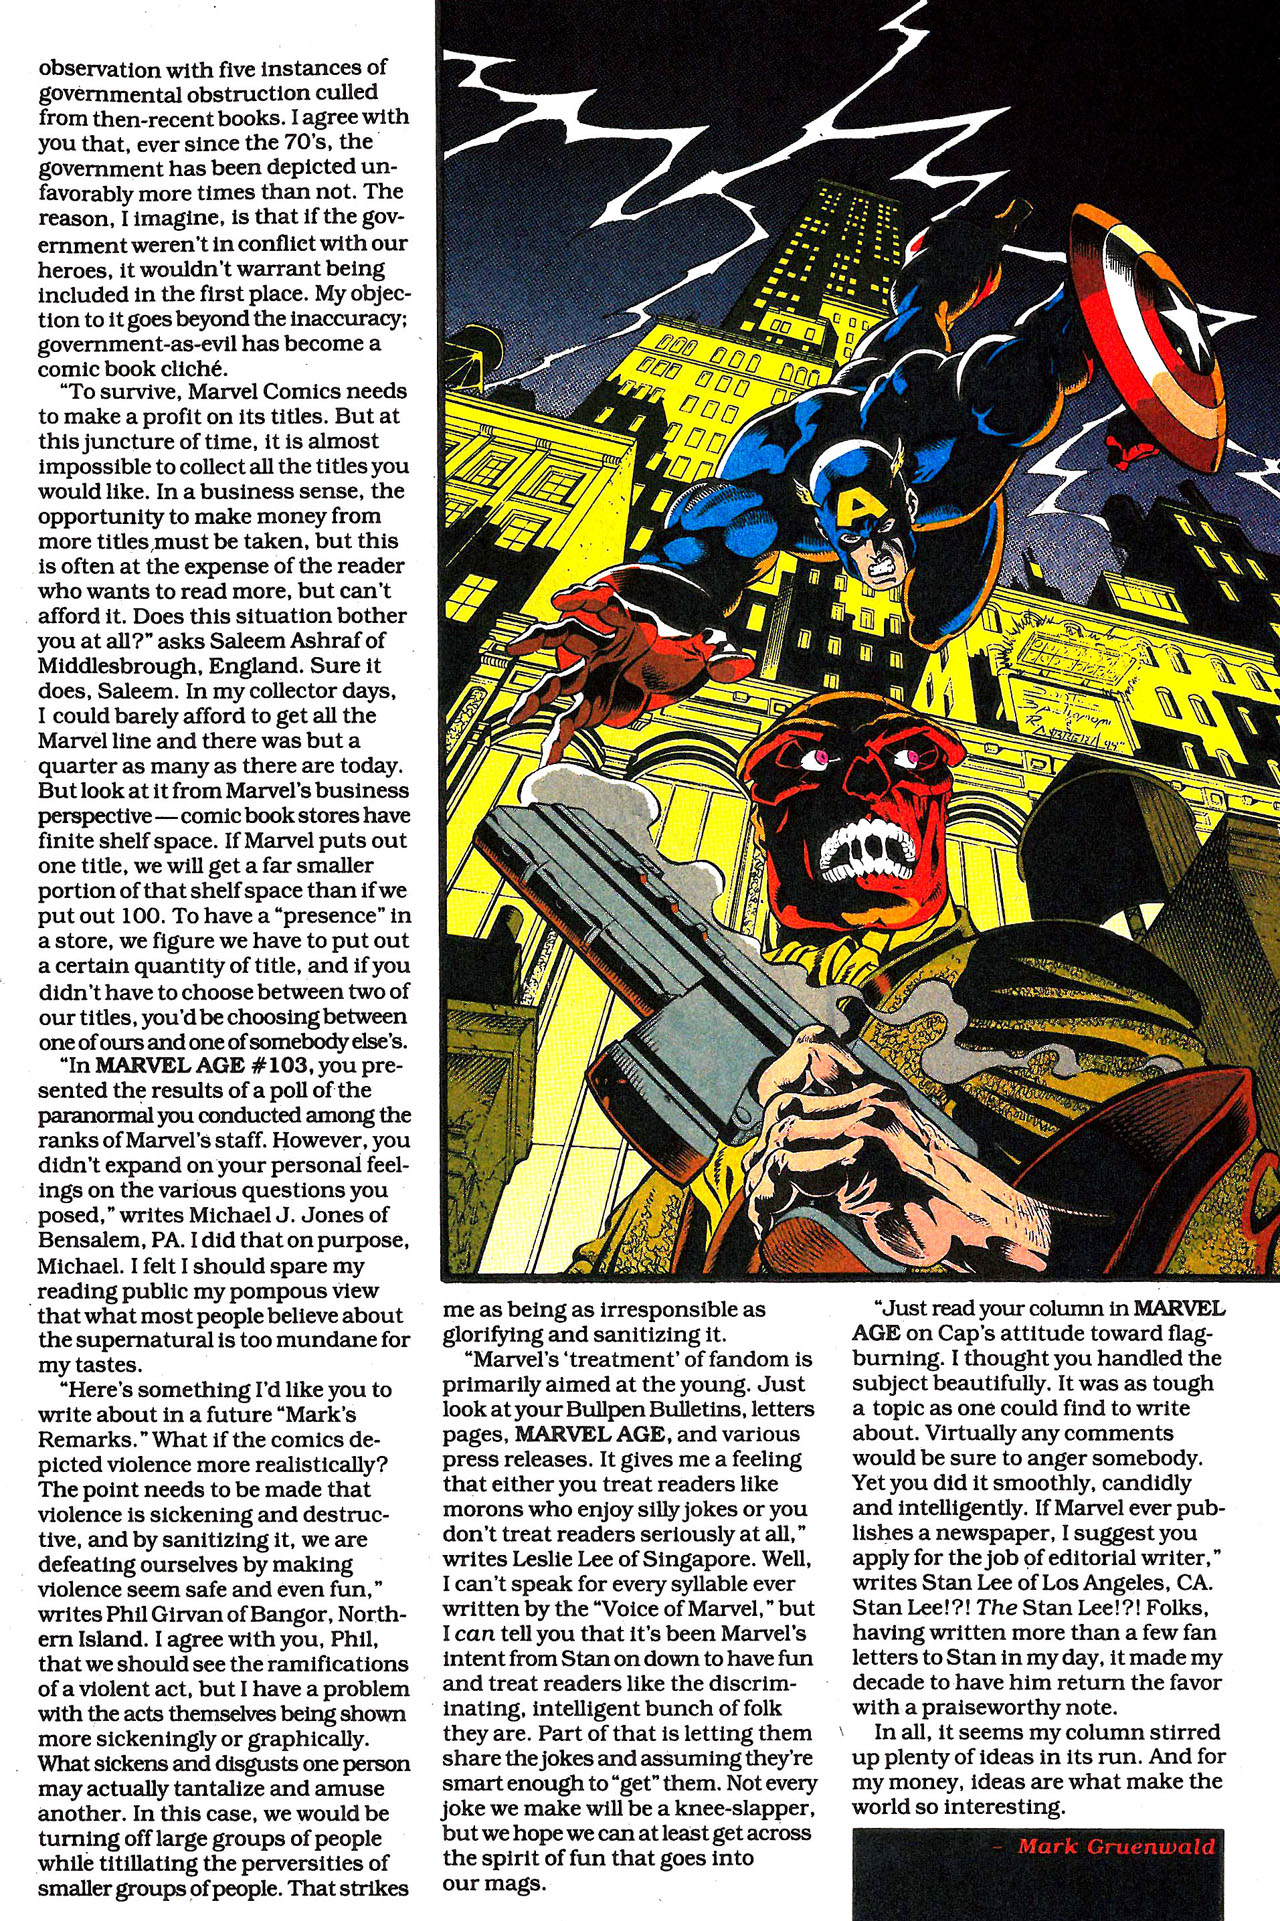 Read online Marvel Age comic -  Issue #139 - 27